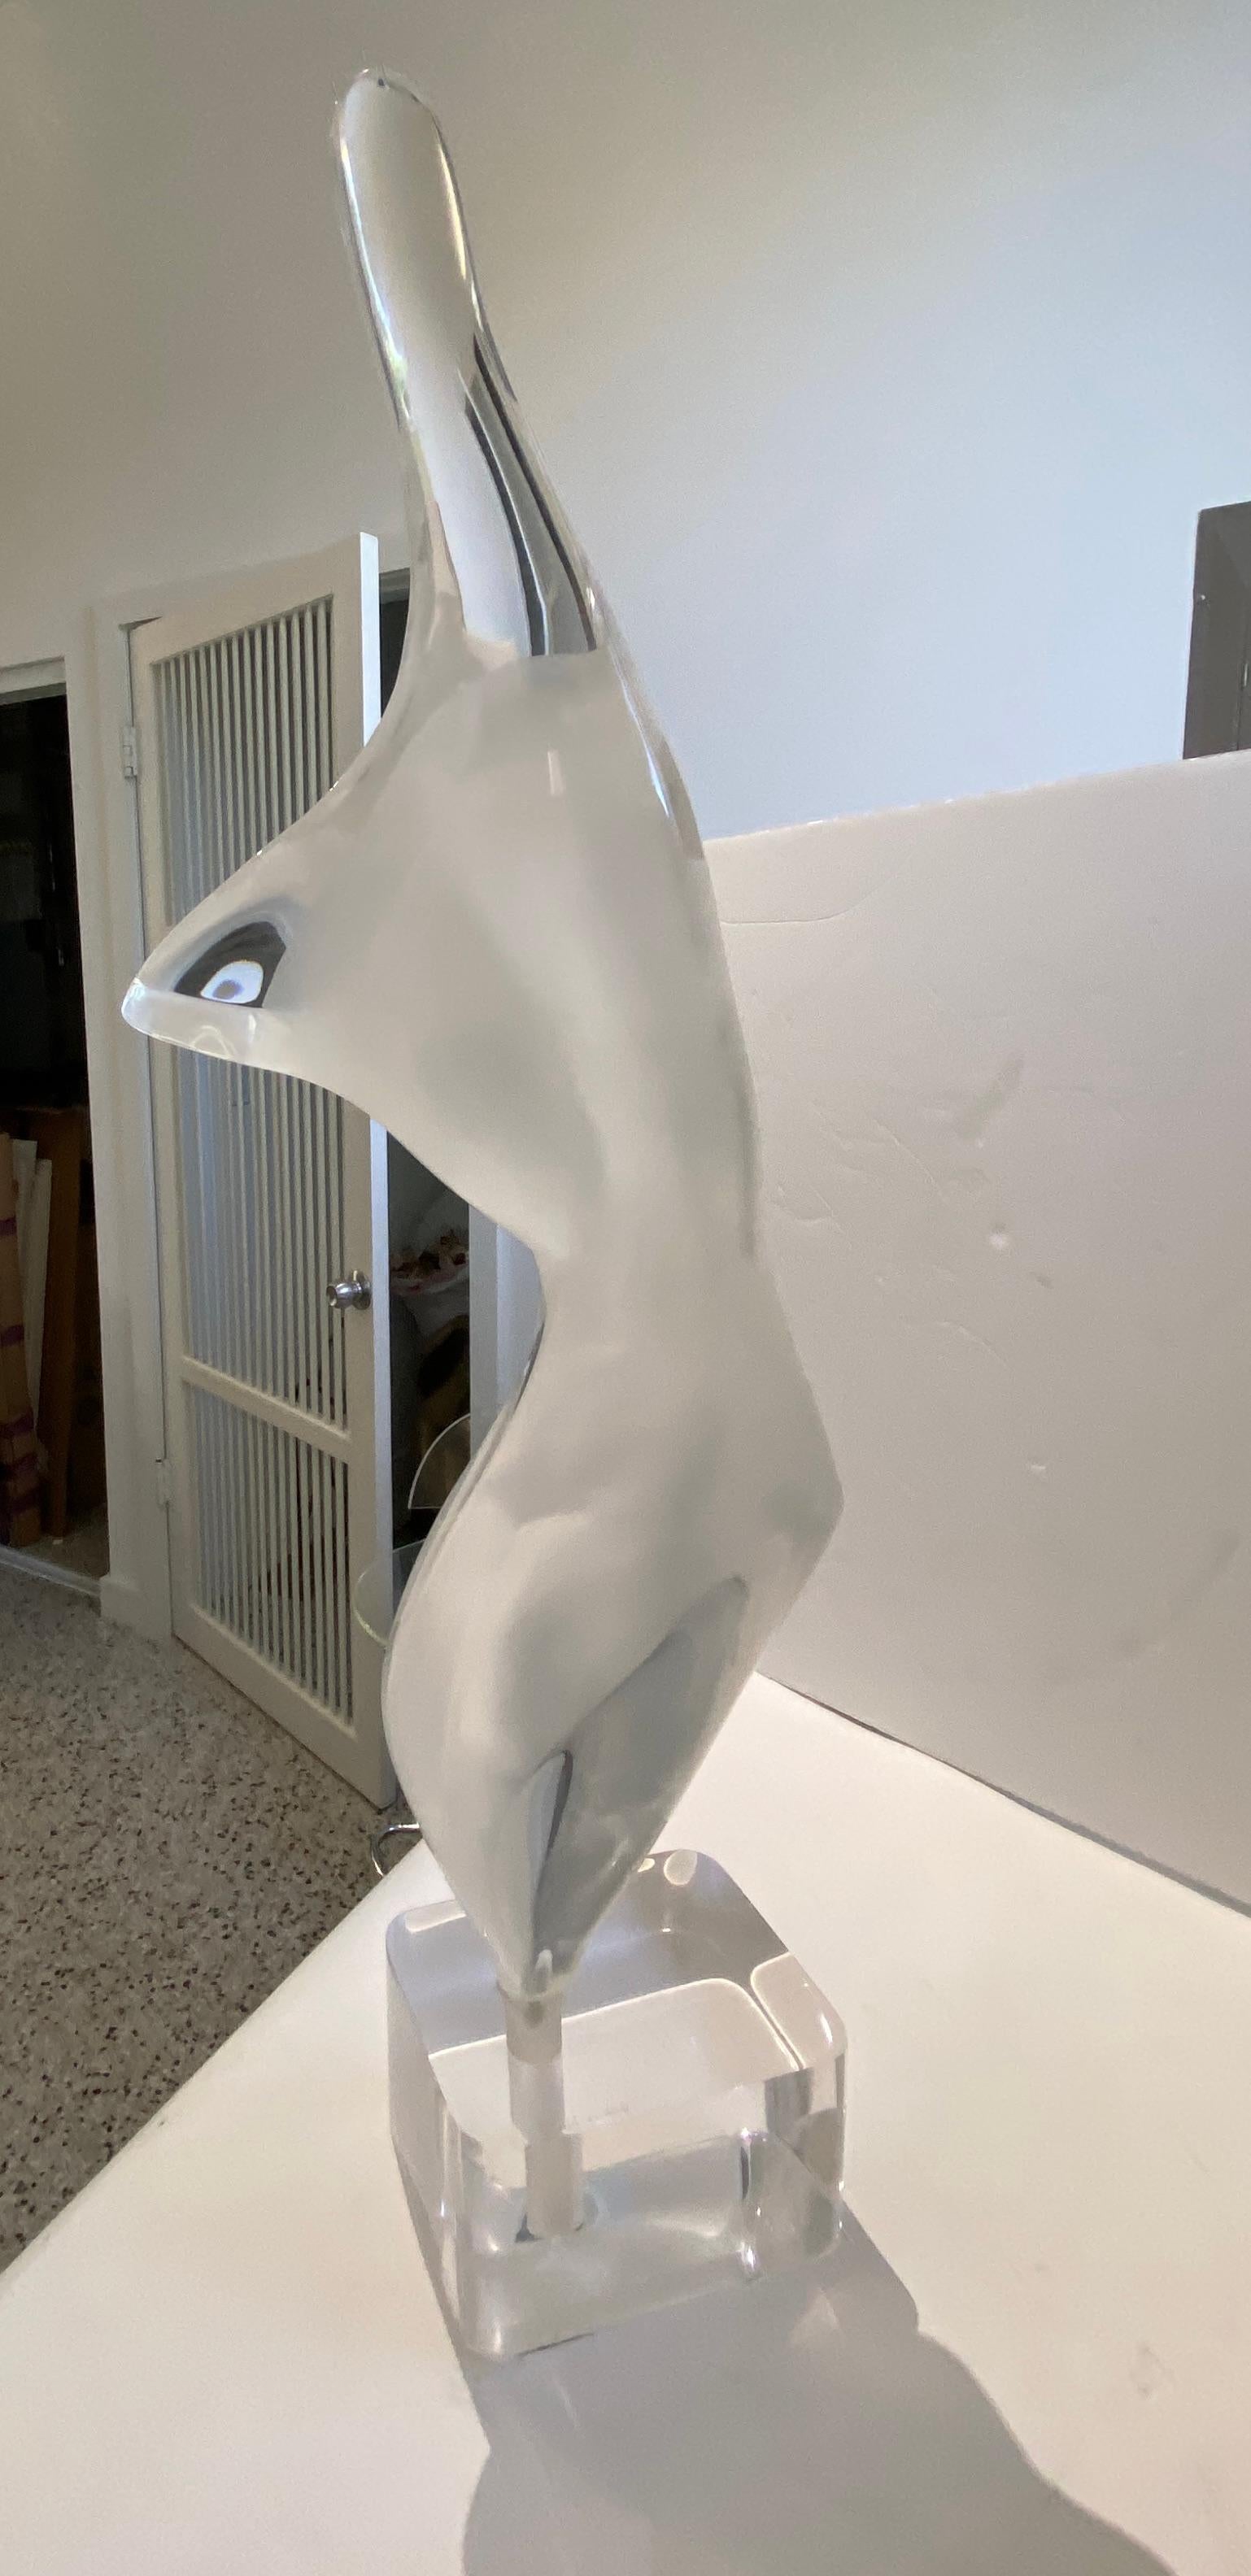 Lucite Stylized Nude Figure Signed Shacham 83' For Sale 1